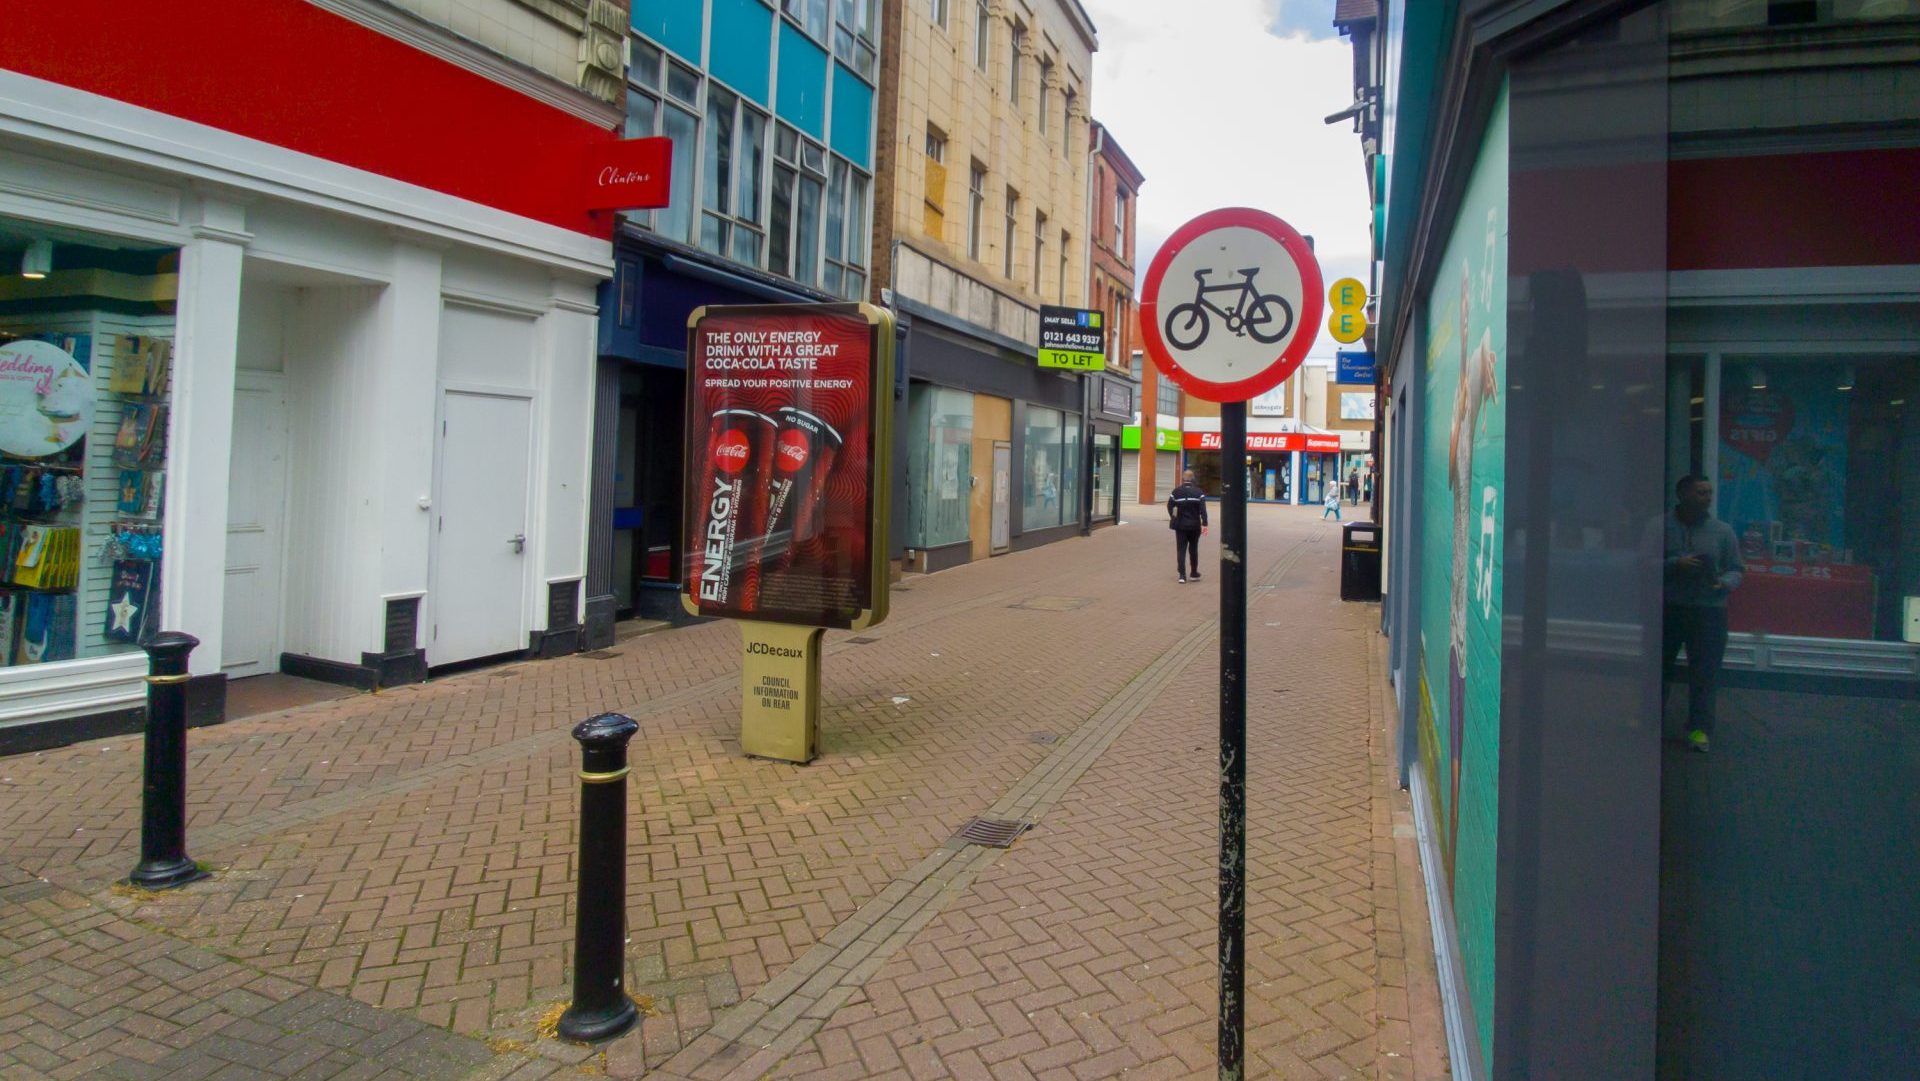 A no-cycling sign on an upright pole at the entrance to a narrow pedestrianised town centre street.